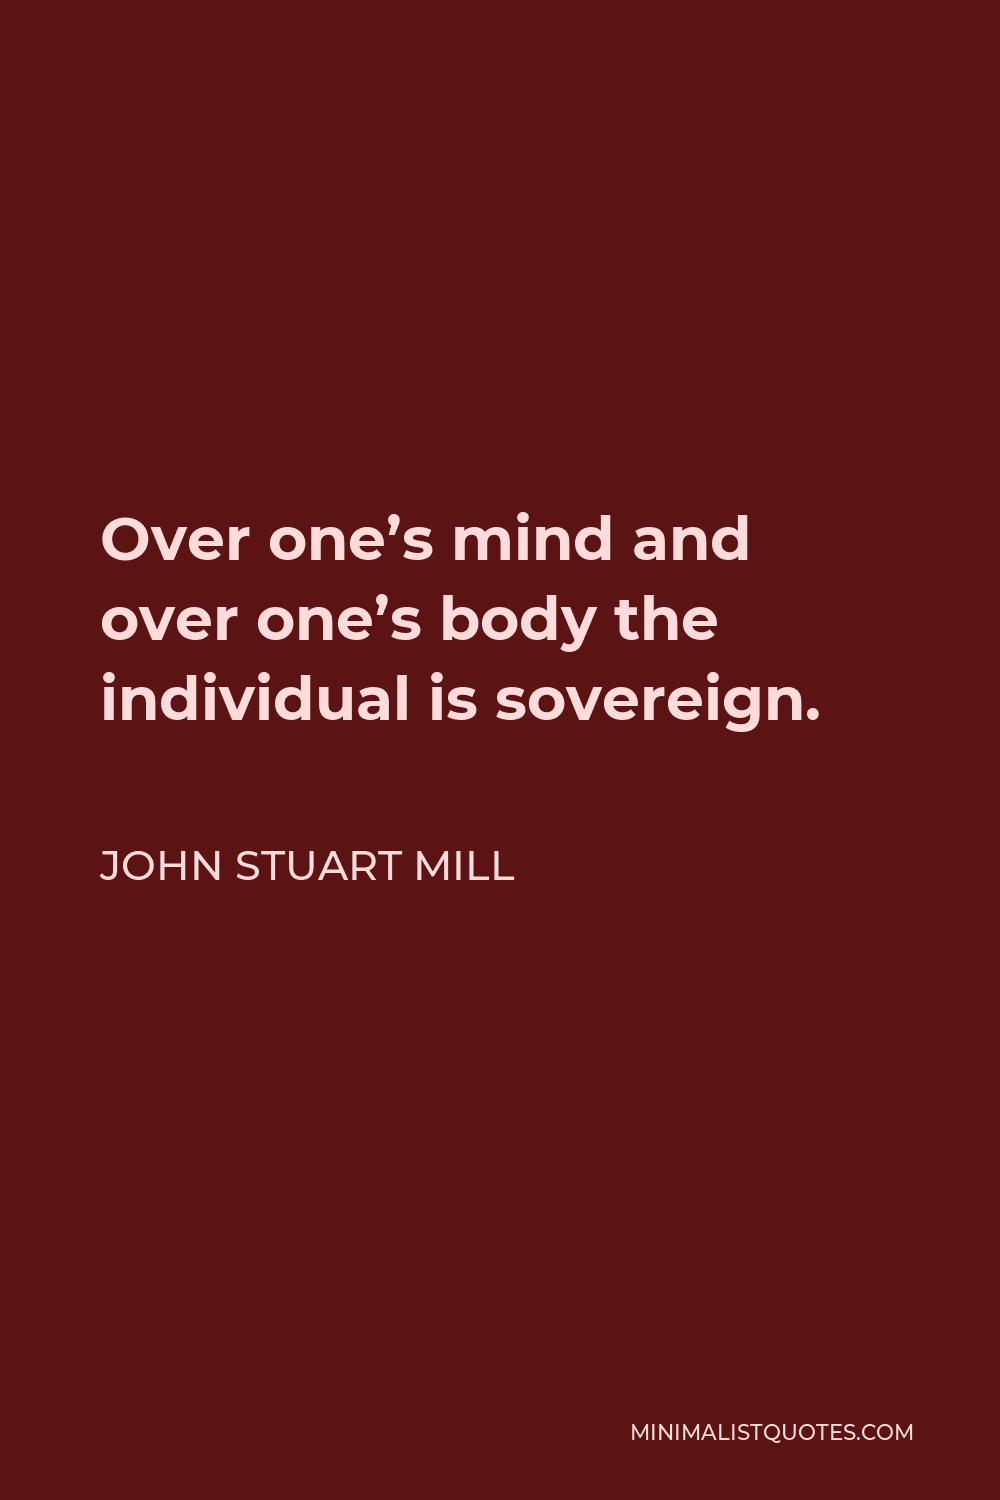 John Stuart Mill Quote - Over one’s mind and over one’s body the individual is sovereign.